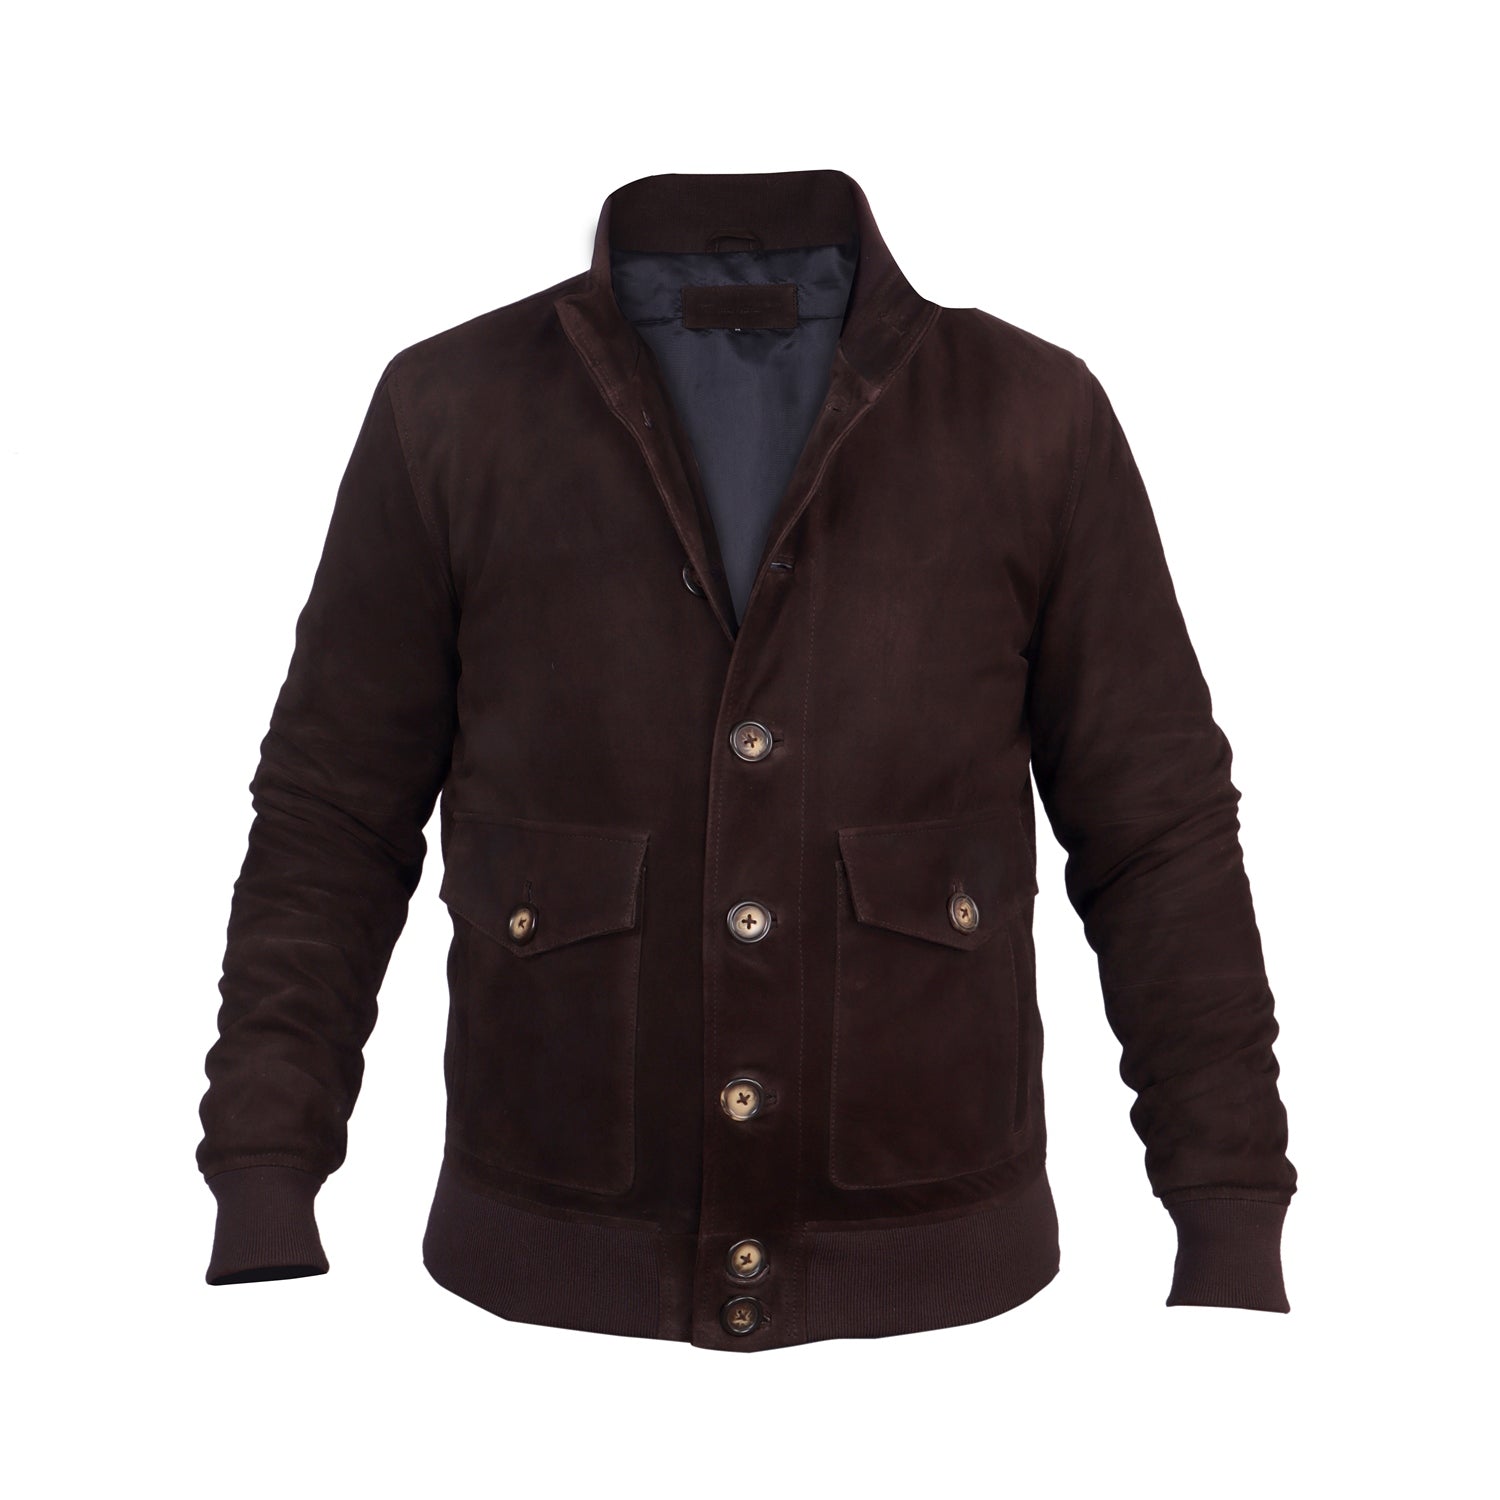 Dual Collar Bomber Dark Brown Suede Leather Jacket with Flap Pockets Button Closure By Brune And Bareskin